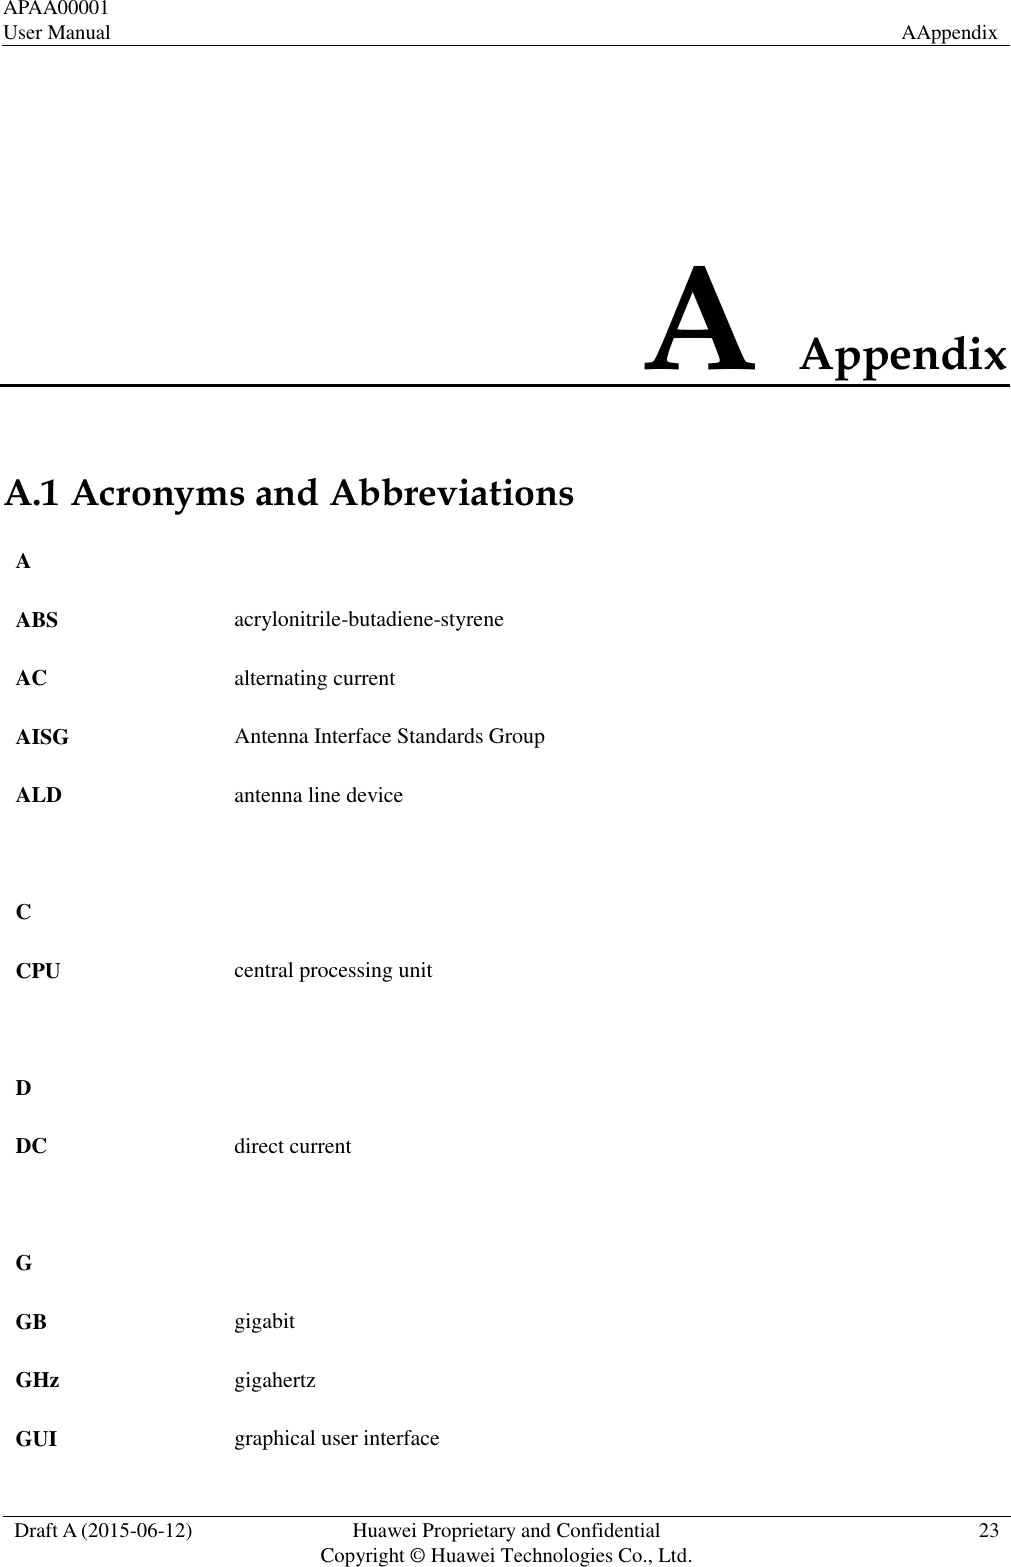 APAA00001 User Manual  AAppendix  Draft A (2015-06-12)  Huawei Proprietary and Confidential           Copyright © Huawei Technologies Co., Ltd.  23  A Appendix A.1 Acronyms and Abbreviations A   ABS acrylonitrile-butadiene-styrene AC alternating current AISG Antenna Interface Standards Group ALD antenna line device    C   CPU  central processing unit    D   DC direct current    G   GB gigabit GHz gigahertz GUI graphical user interface 